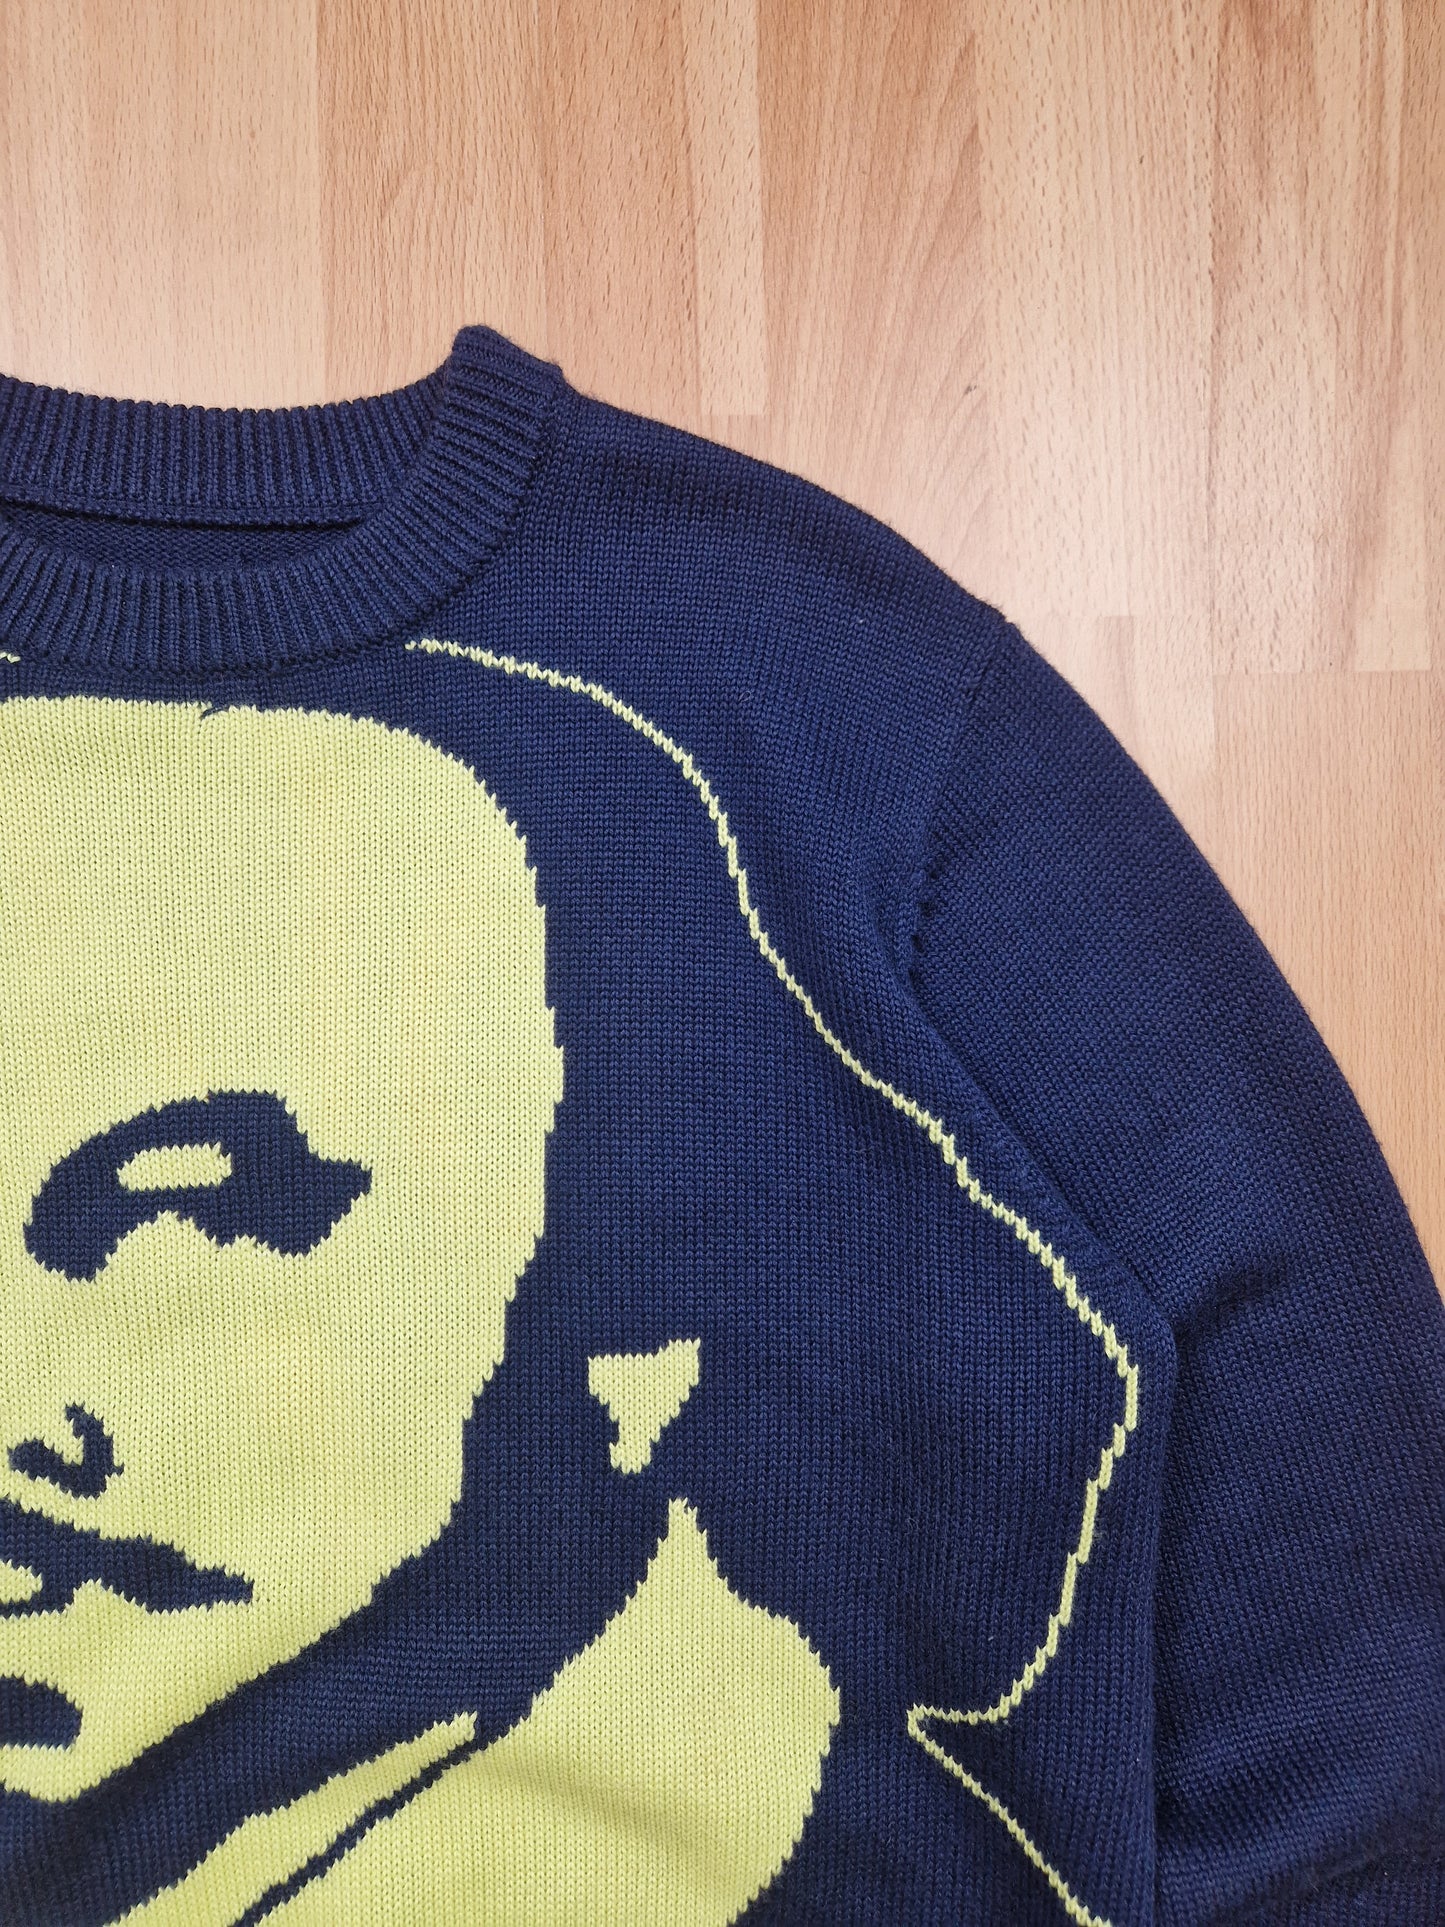 RARE Palace 'As You Like It' Shakespeare Knit Sweater (M)